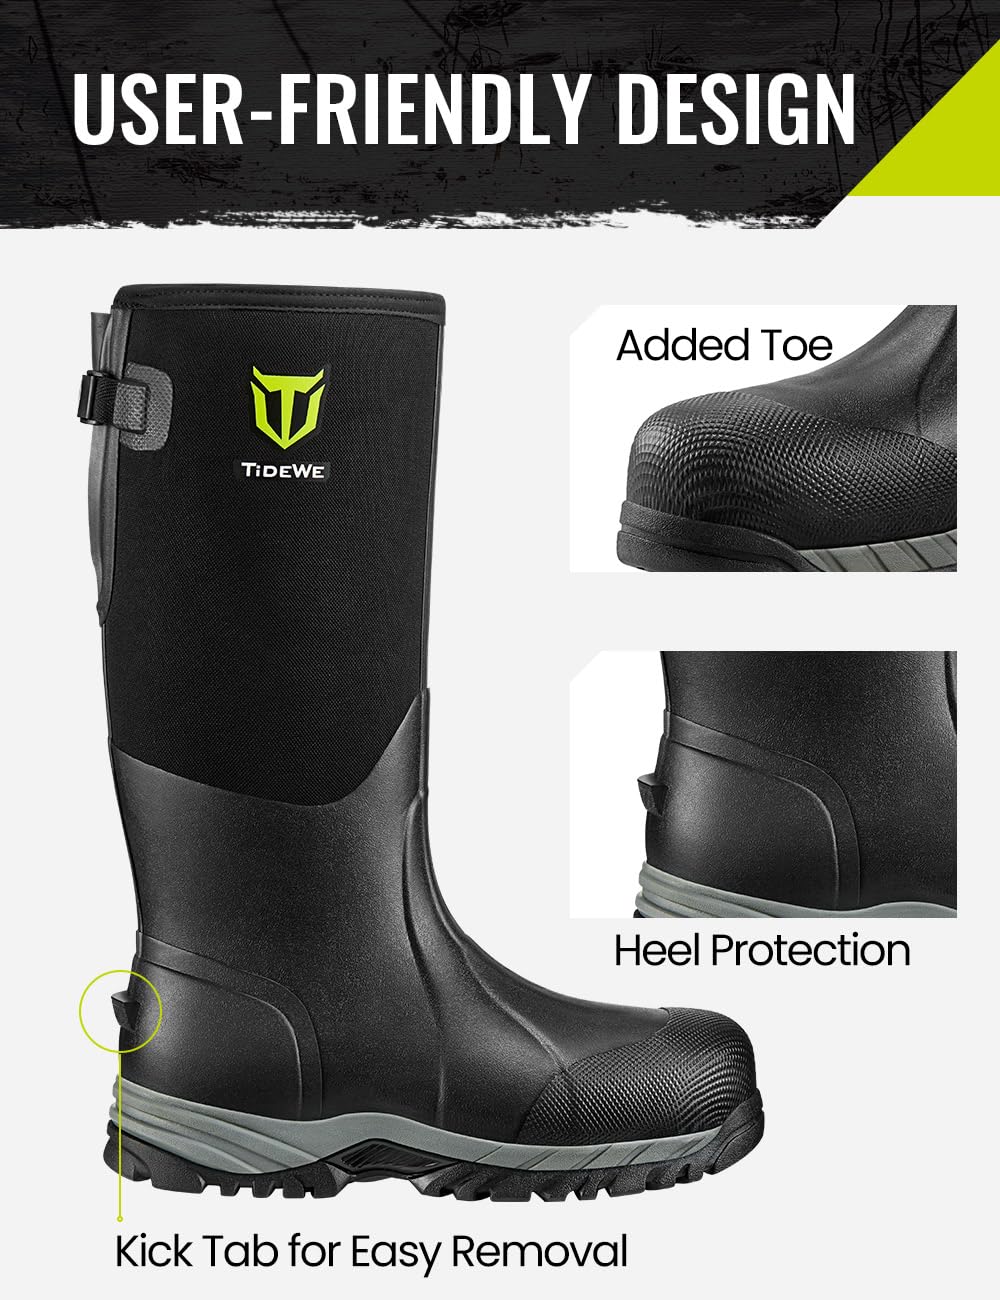 TIDEWE Work Boots Puncture-Proof with Steel Toe & Shank, Waterproof Anti Slip Rubber Boots for men, 6mm Neoprene Outdoor Boots, Durable Hunting Boots for Manufacturing, Construction, Farming(Black,Size 7-13)